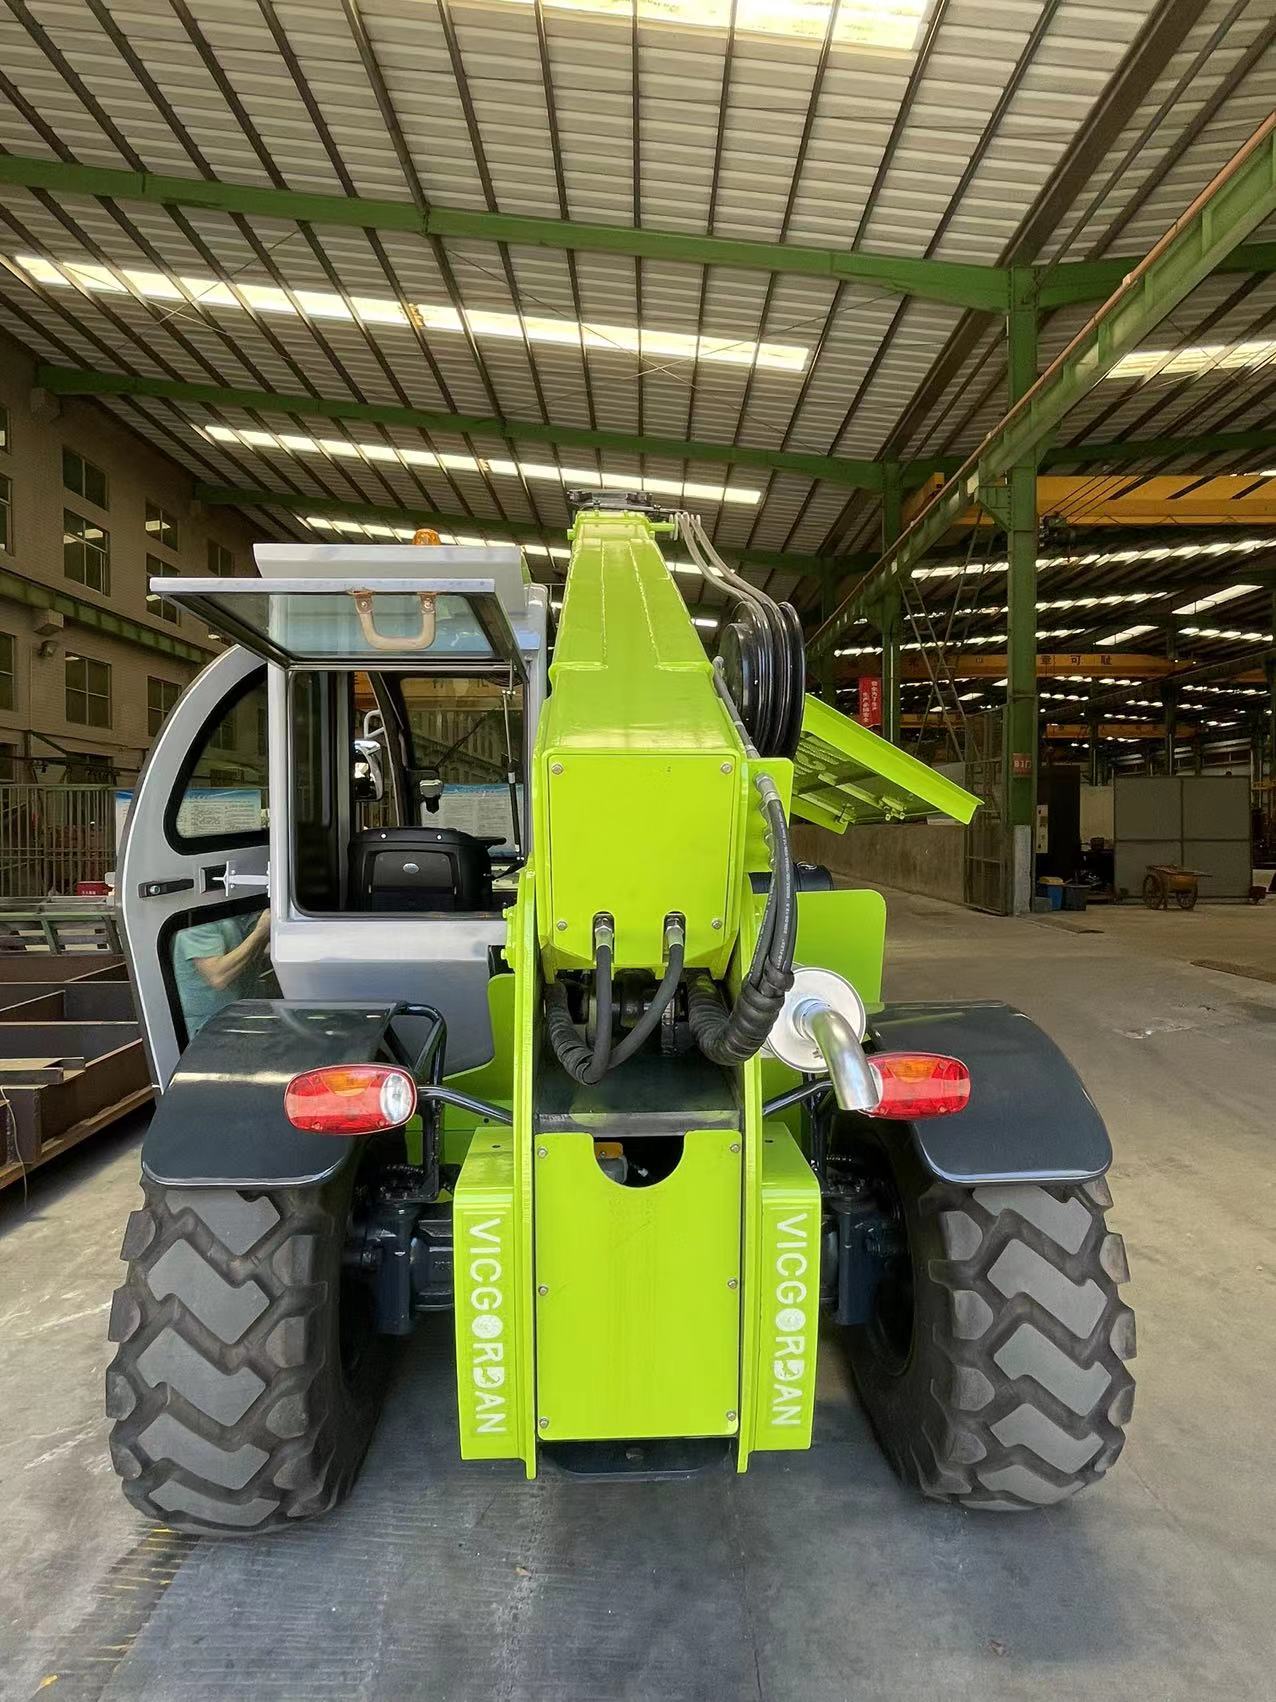 VicGorDan 3 ton 7 m telehandler with 4WD and 4WS Axle is testing by customer before ship